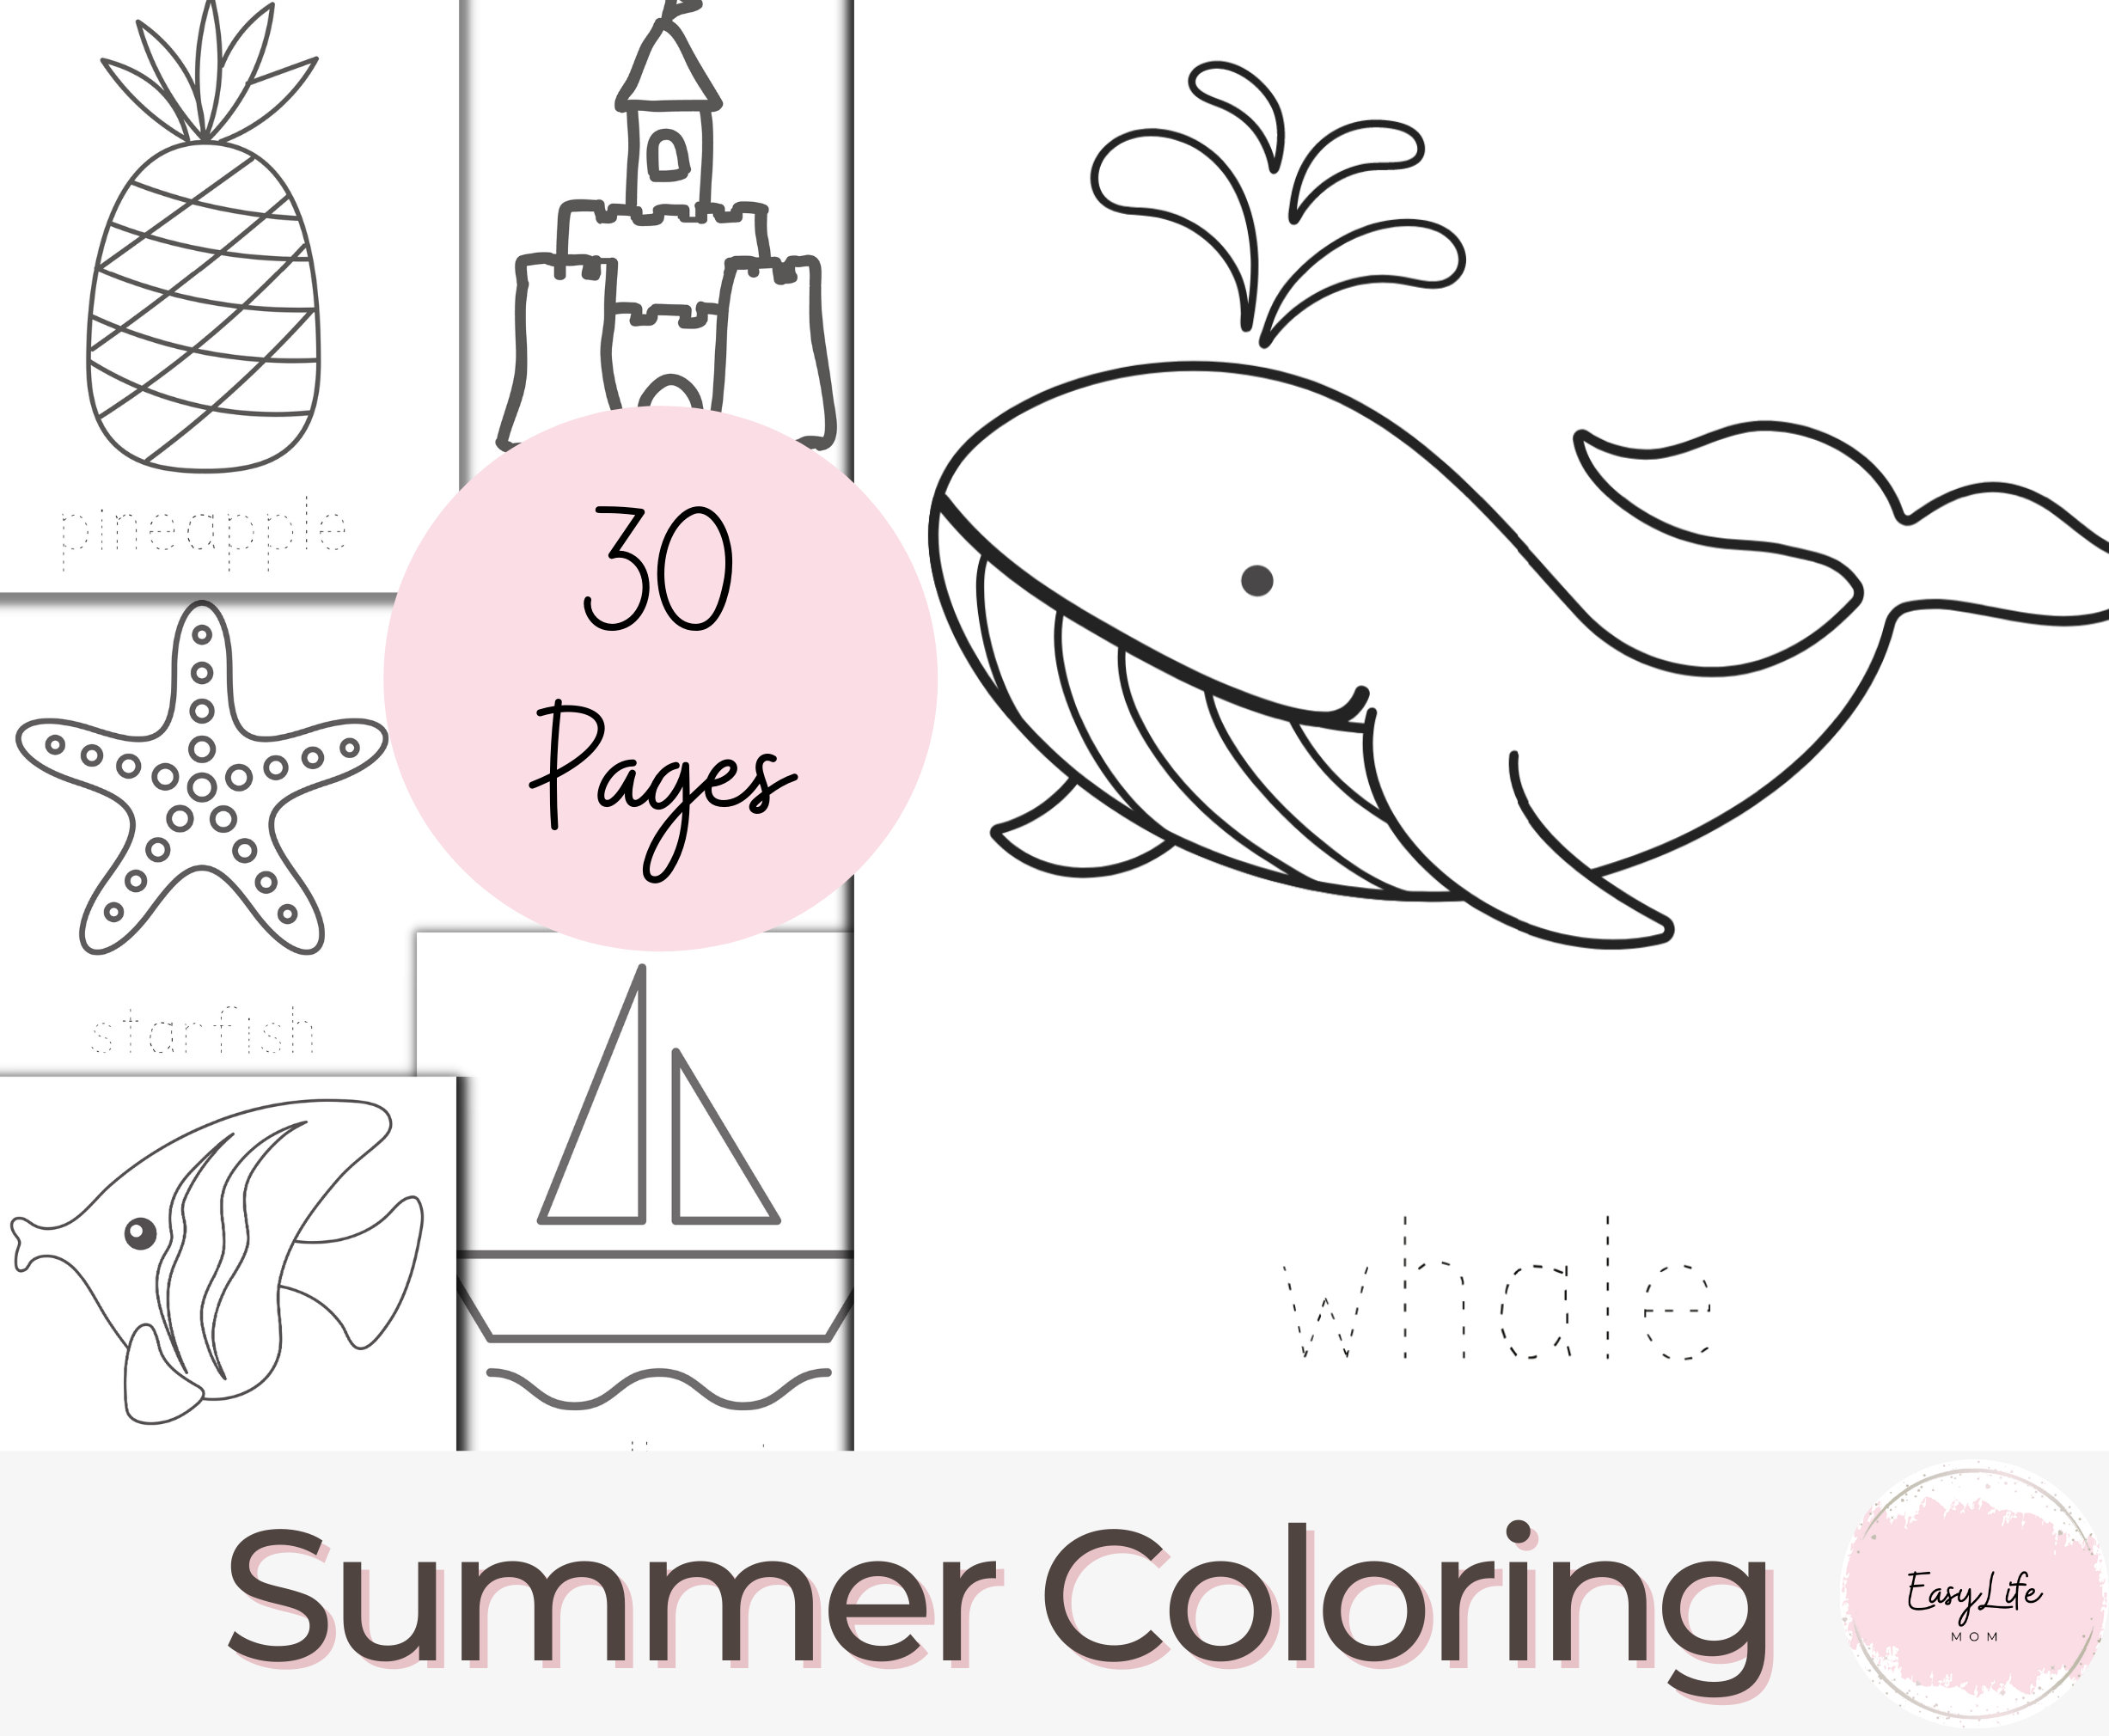 Summer coloring pages printable simple coloring pages preschool coloring summer activities summer coloring kids coloring book instant download